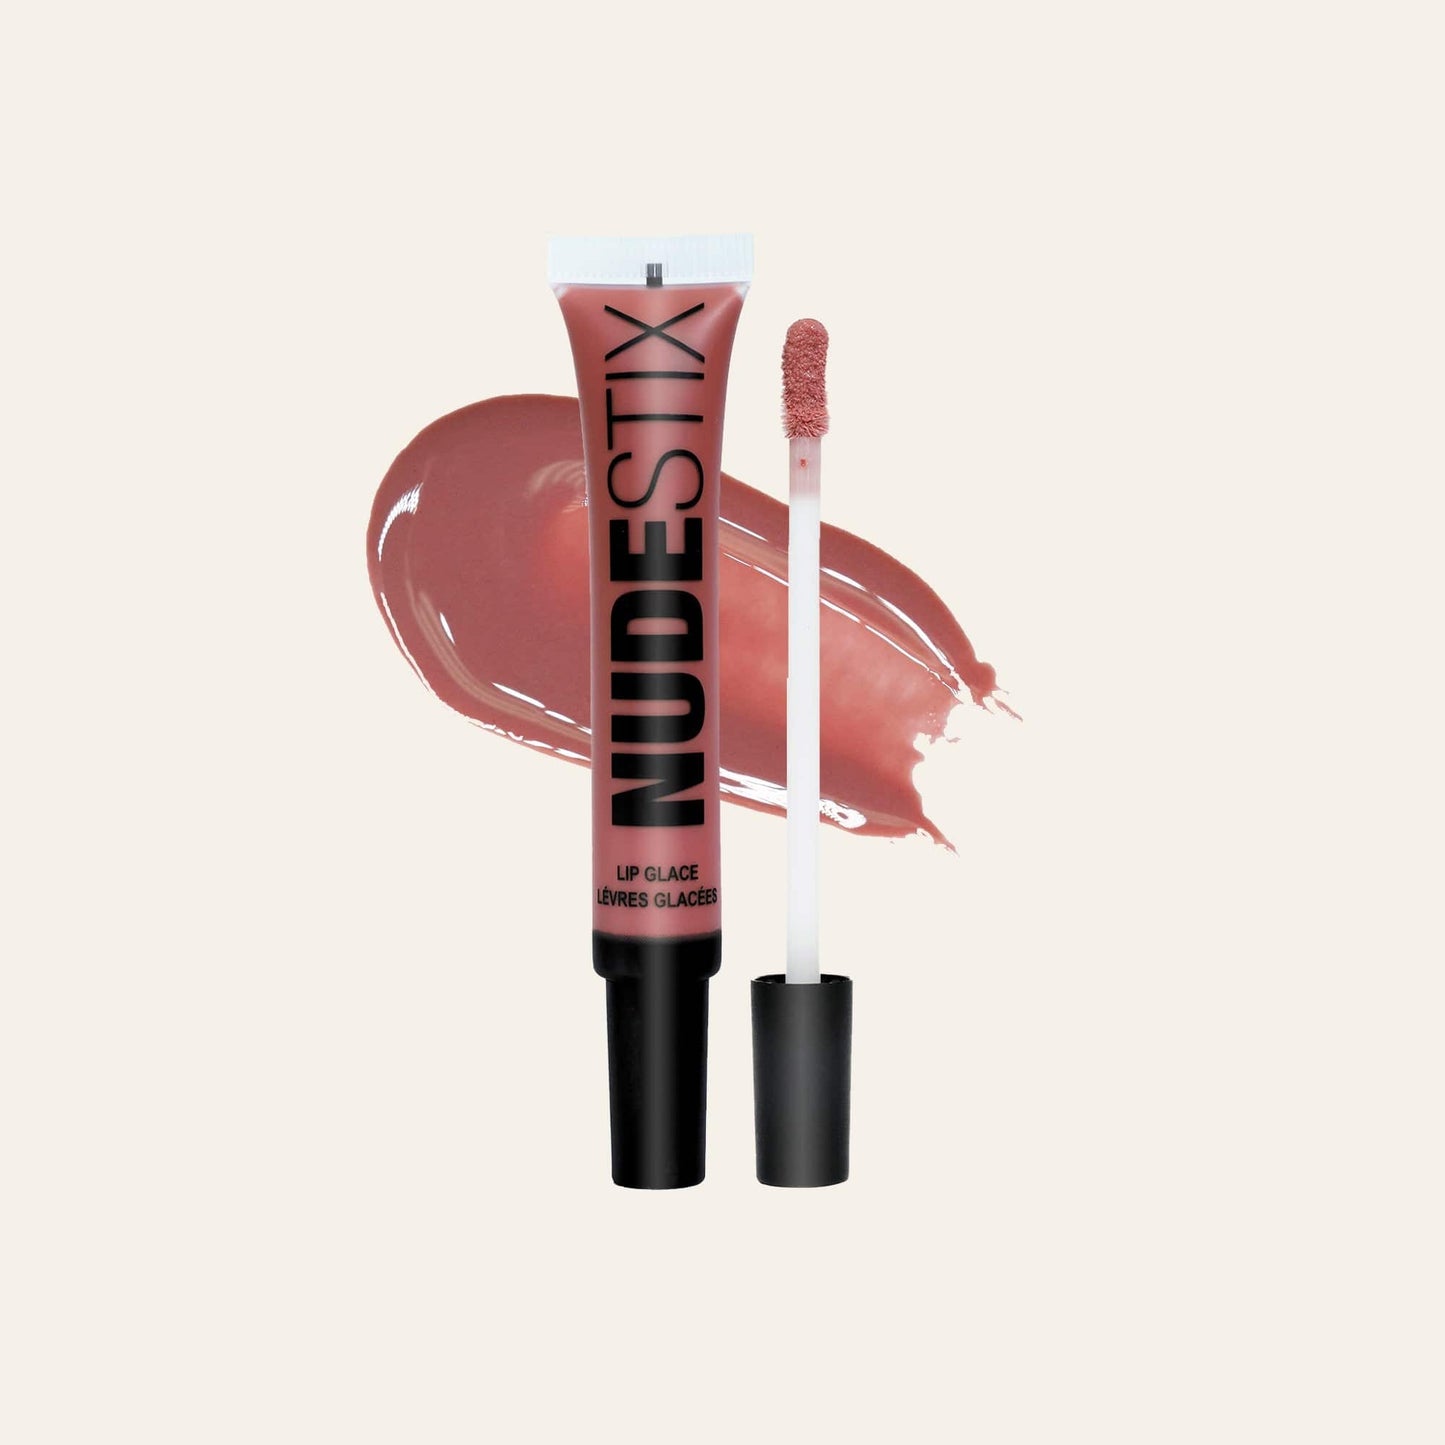 Lip Glace in shade Nude 04